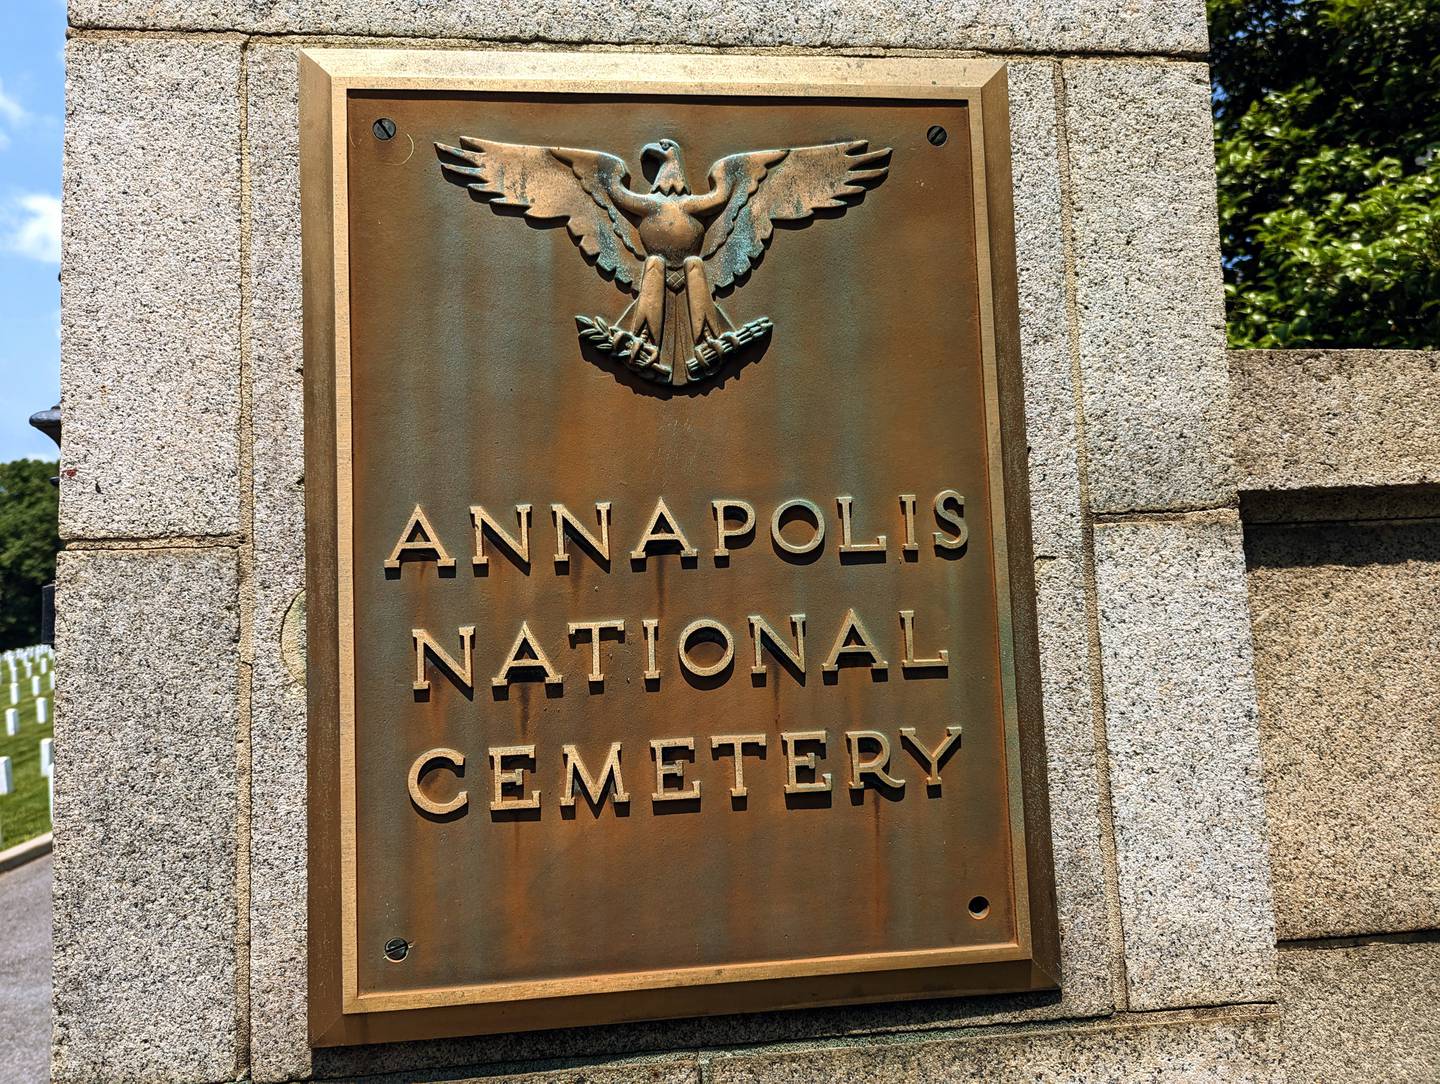 A Memorial Day ceremony will be held at 5 p.m. on May 26, 2023 at the Annapolis National Cemetery.